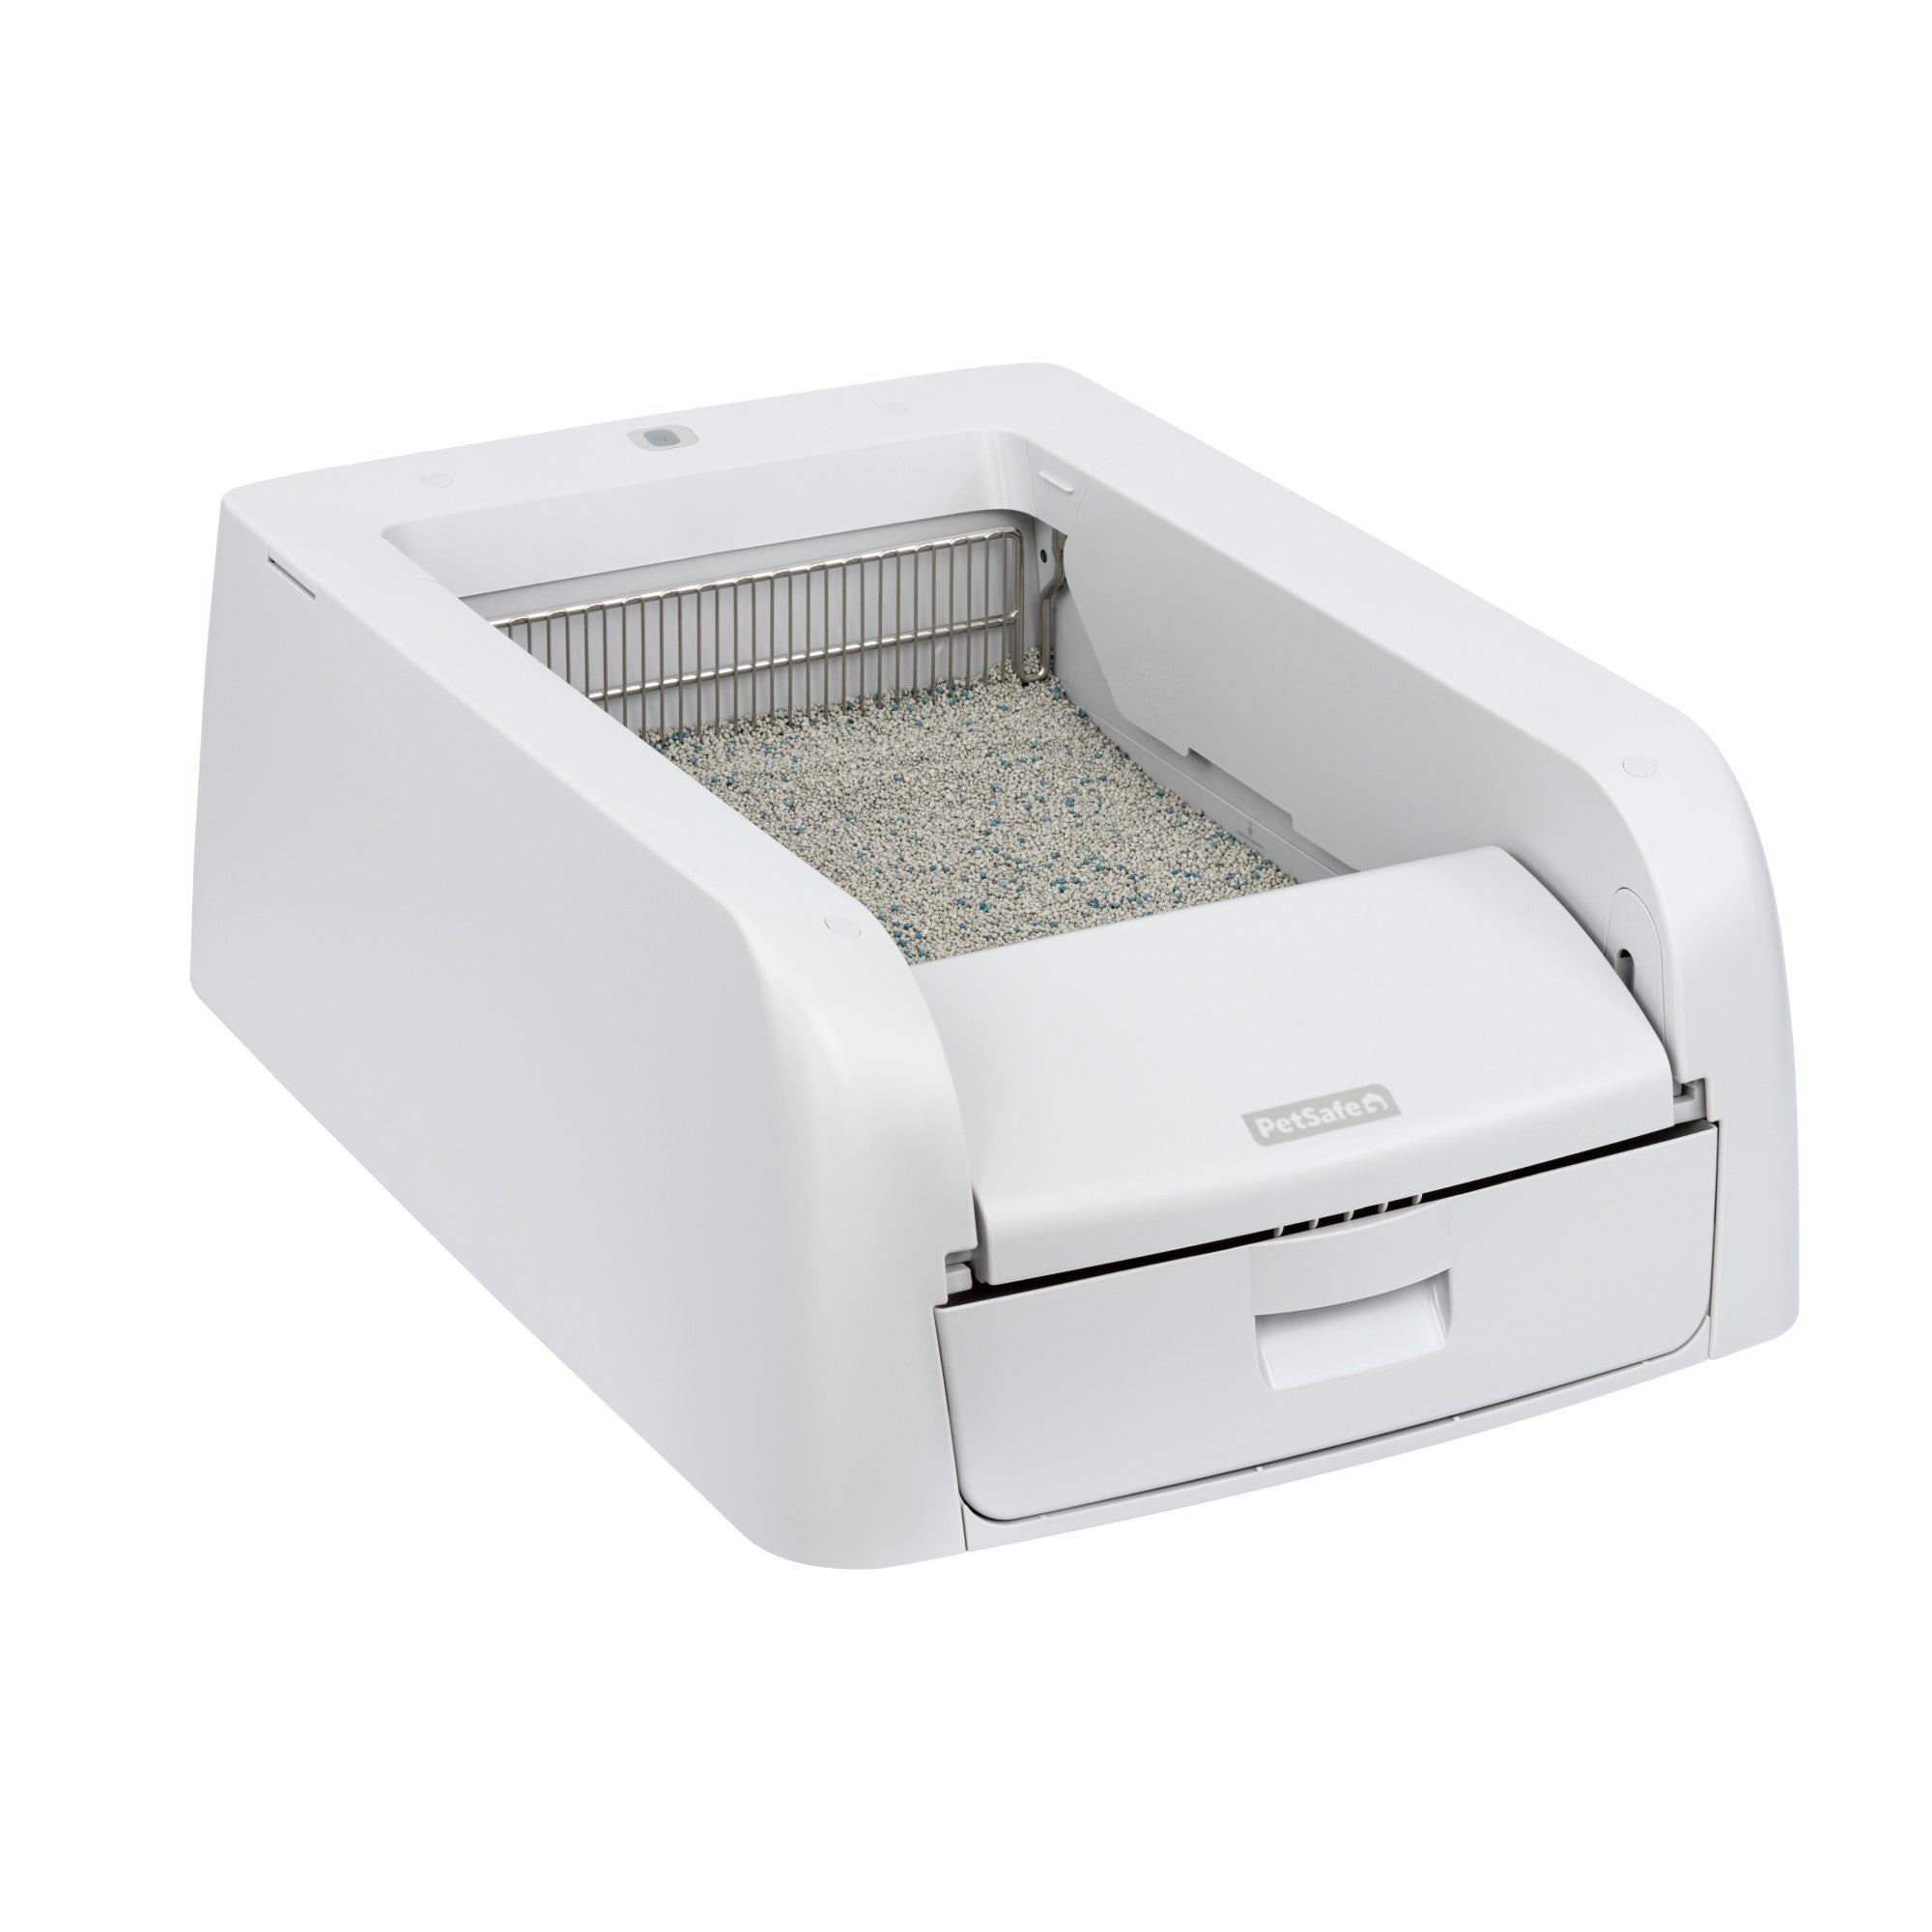 ScoopFree Clumping Self-Cleaning Litter Box